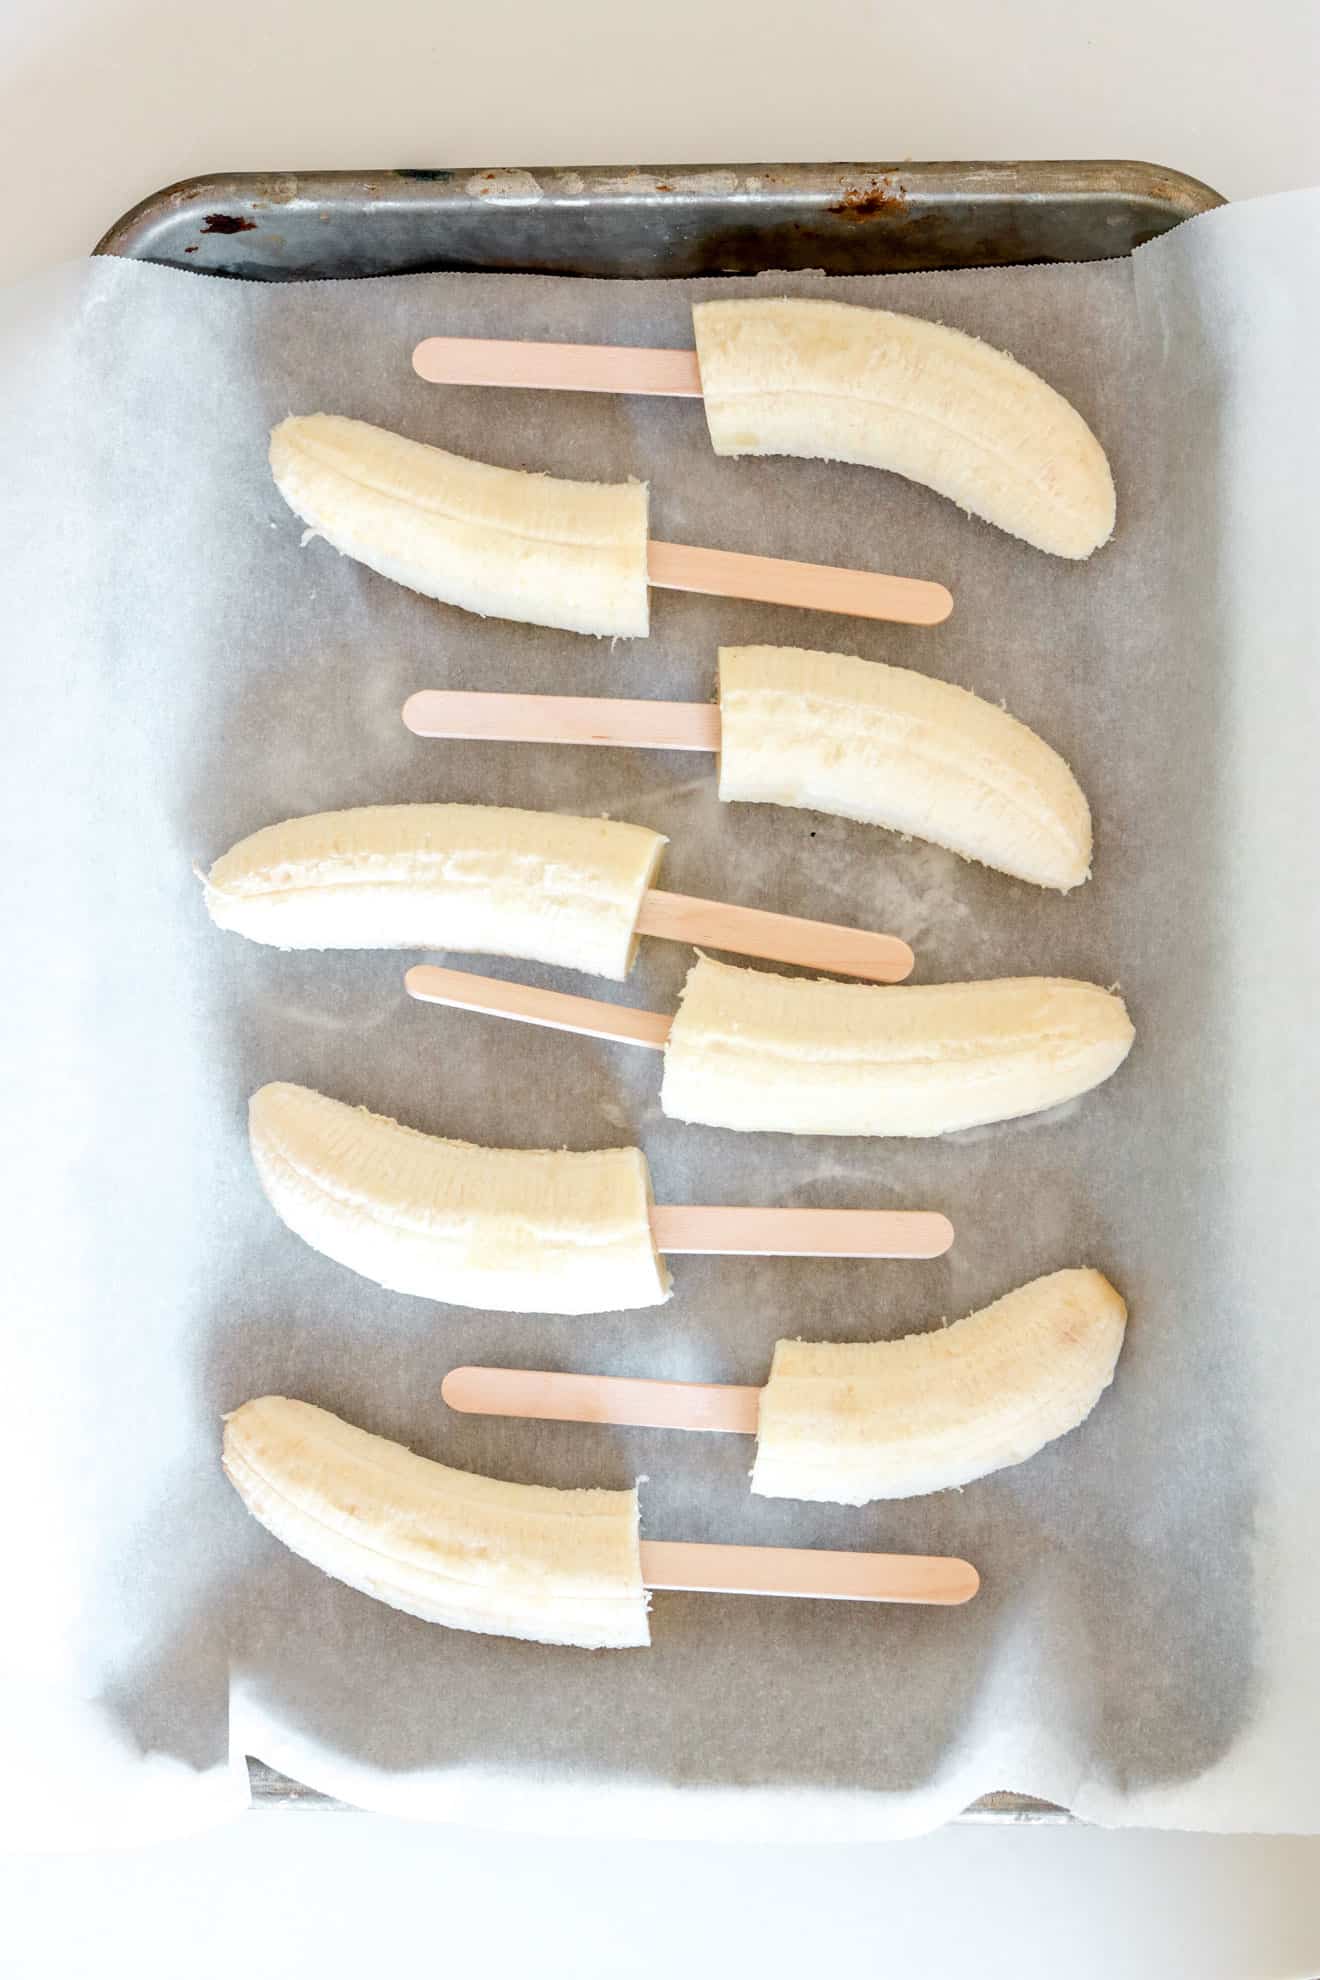 baking sheet lined with parchment paper and halved bananas with popsicle sticks process image for Chocolate Covered Banana Pops